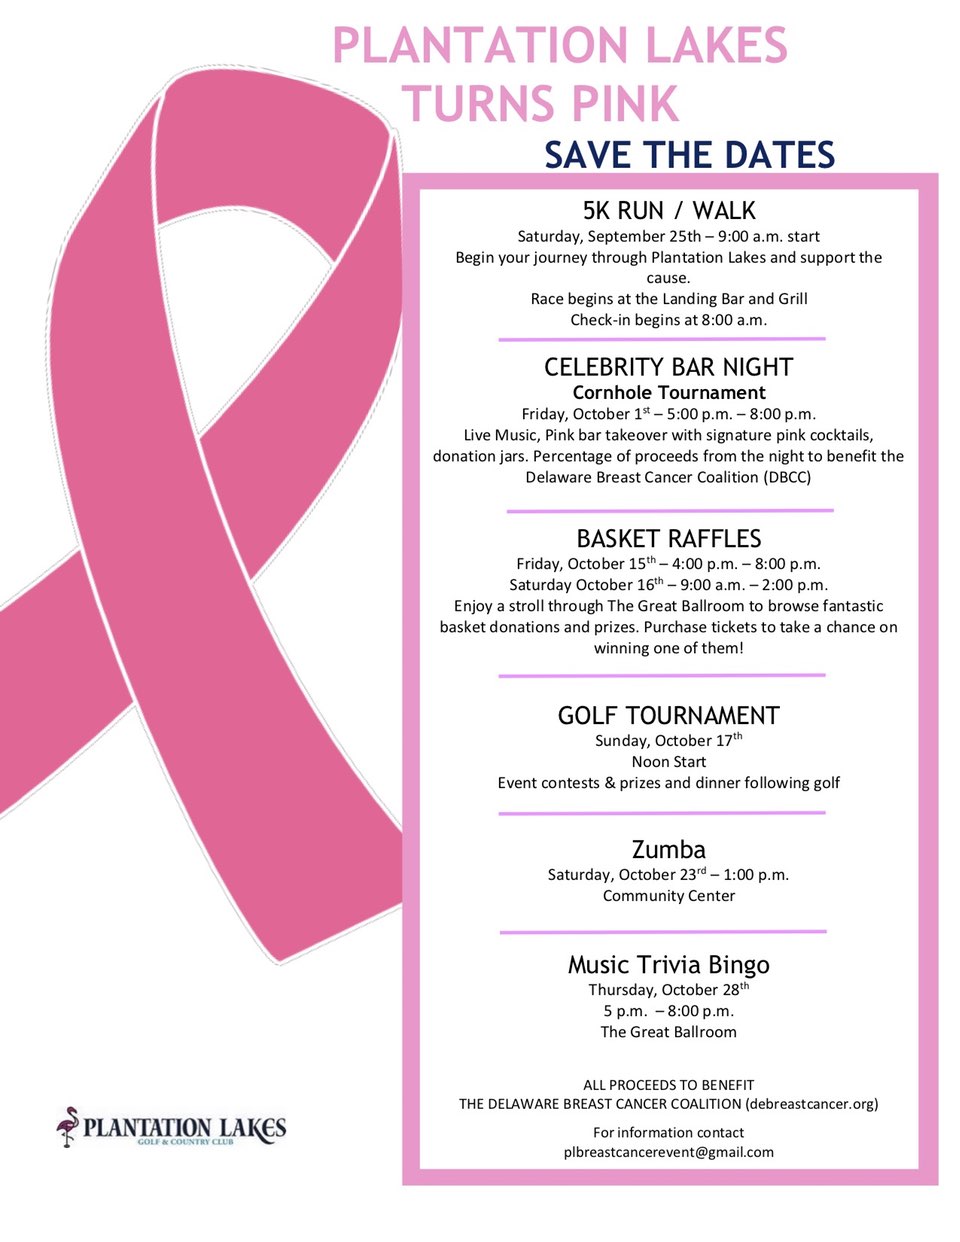 Plantation Lakes Breast Cancer events